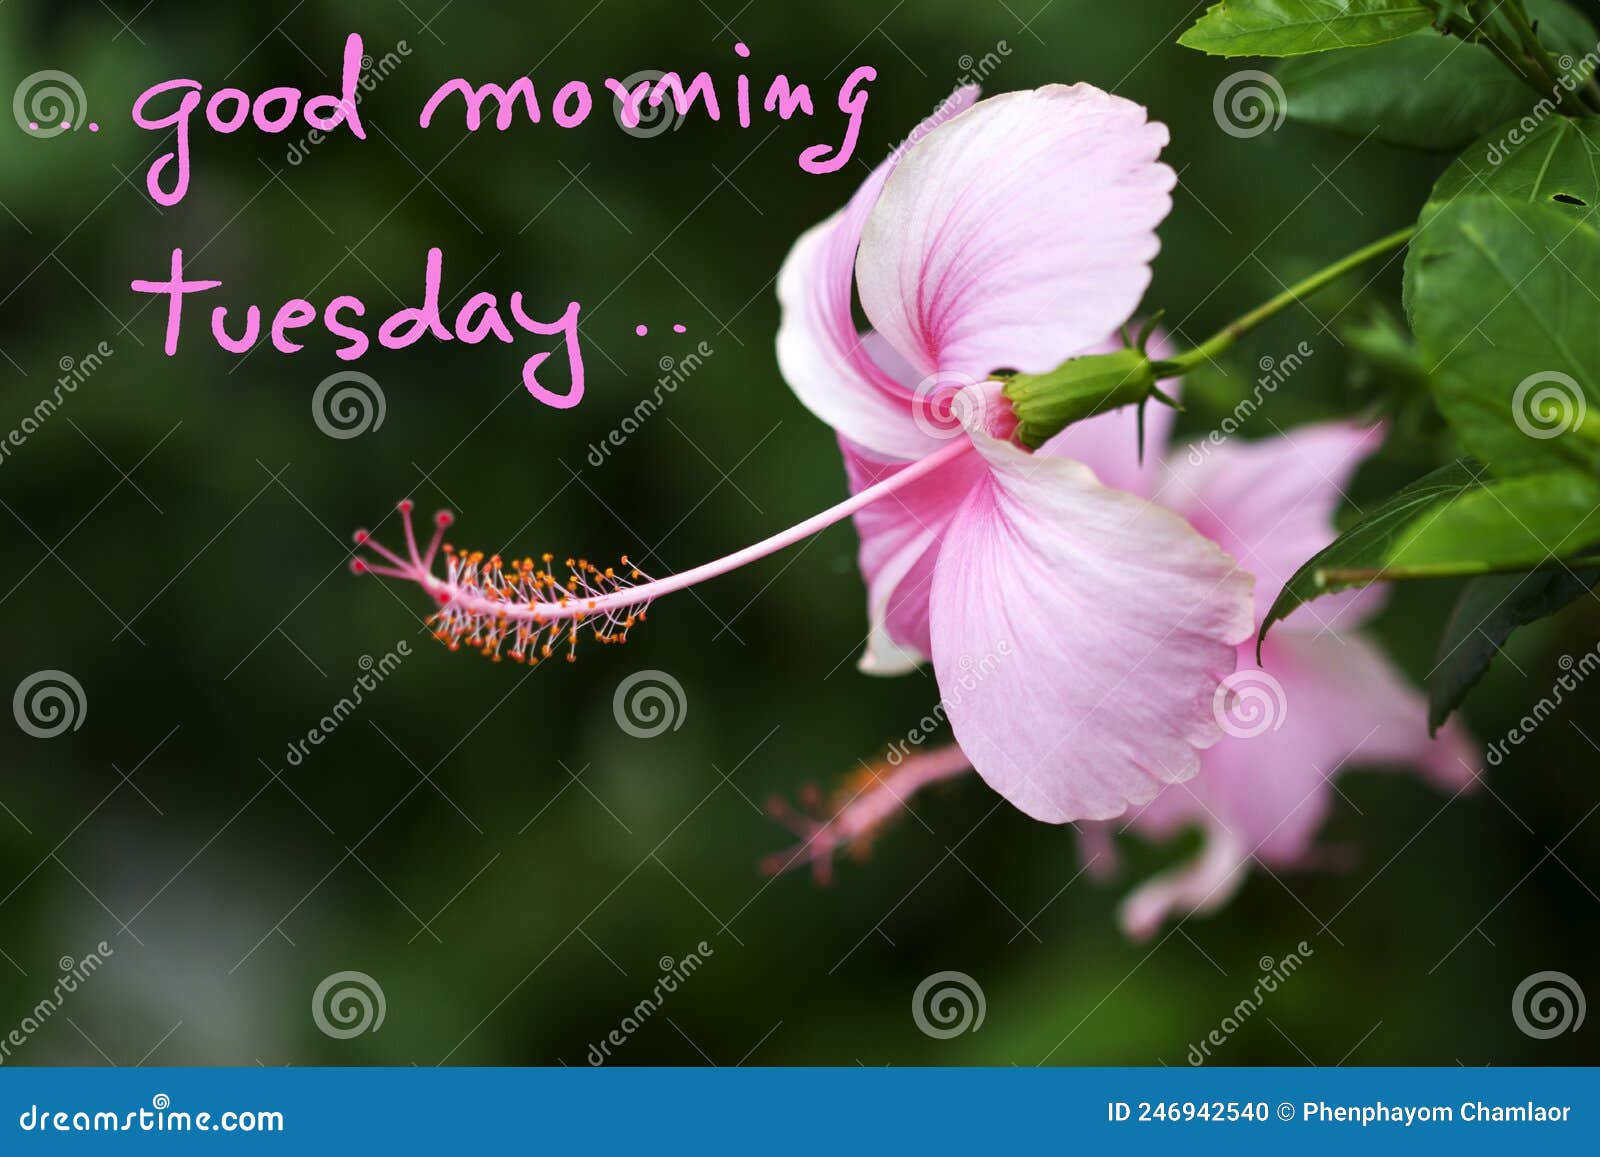 Good Morning Tuesday Message Card Handwriting with Pink Flowers ...